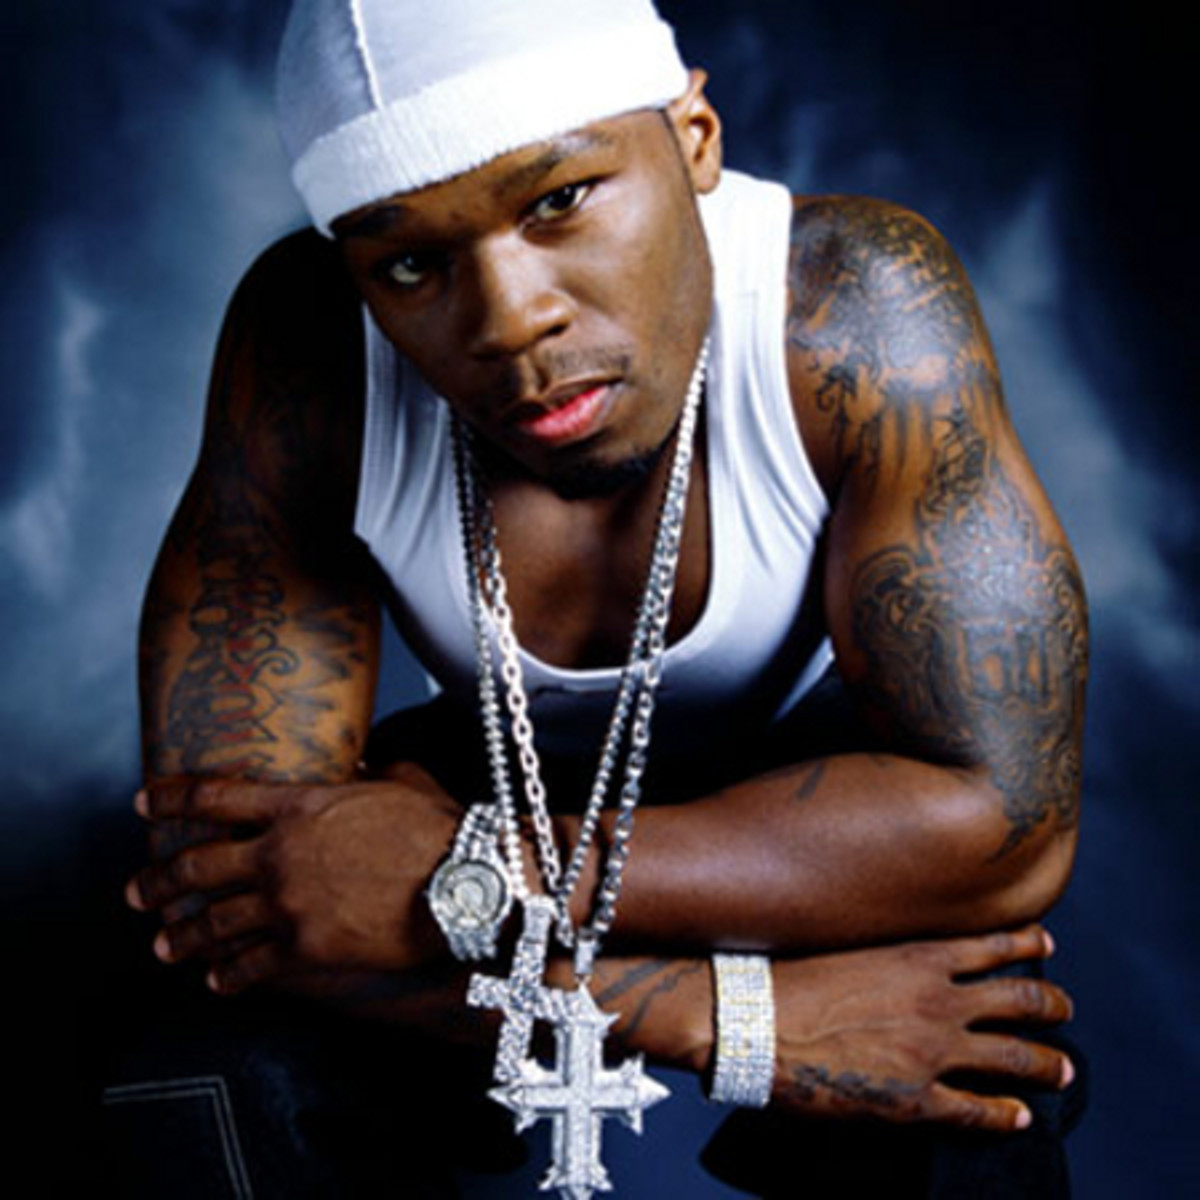 Wrap-Up Magazine: Name Your Most Favorite 50 Cent Track